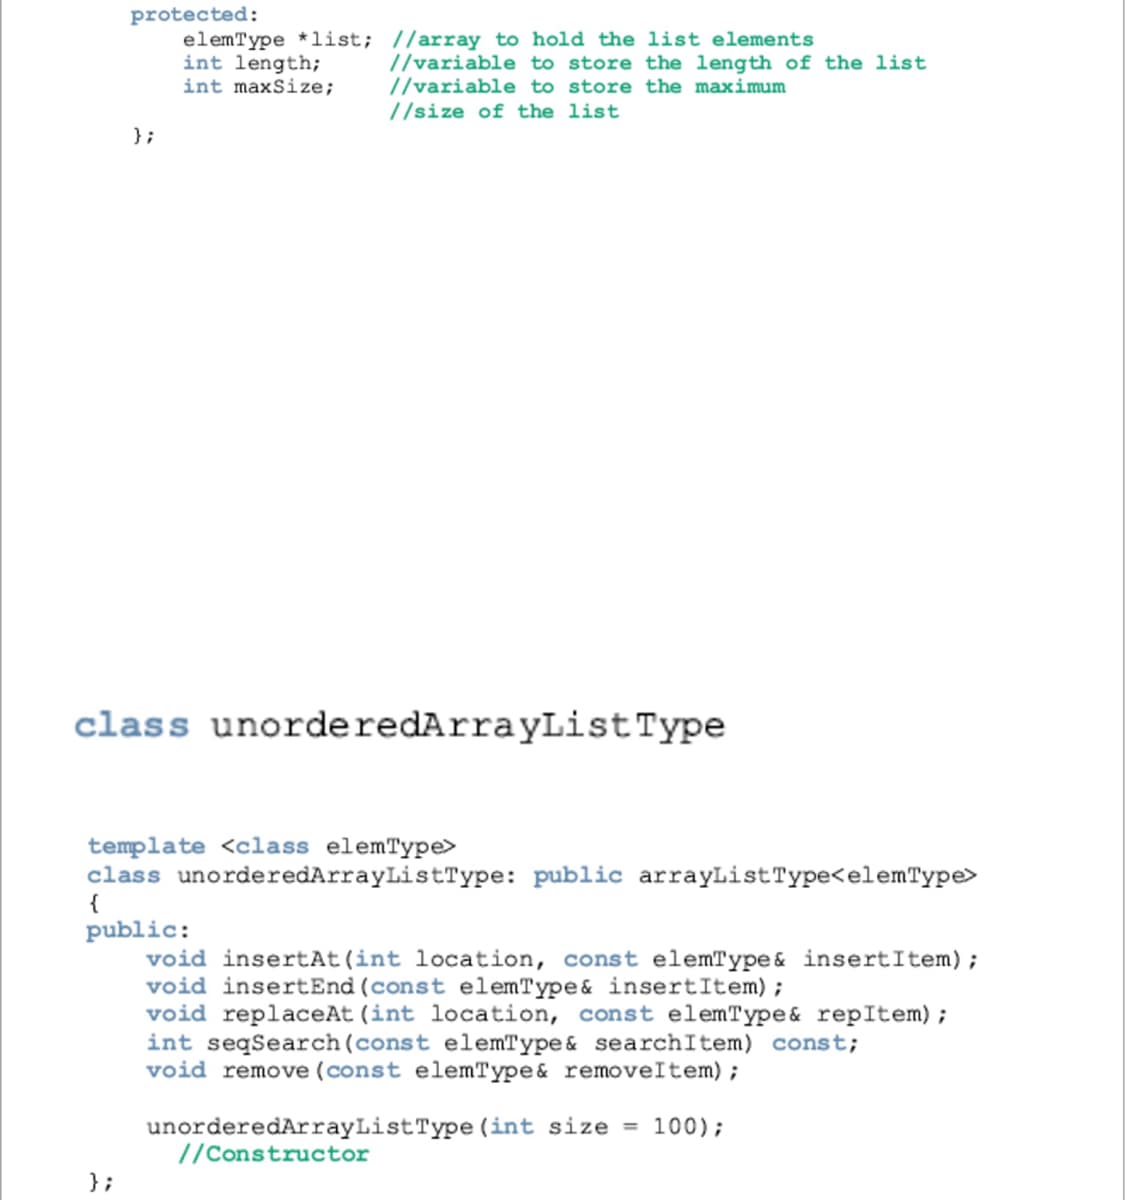 protected:
elemType *list; //array to hold the list elements
int length;
int maxSize;
//variable to store the length of the list
//variable to store the maximum
//size of the list
};
class unorderedArrayListType
template <class elemType>
class unorderedArrayListType: public arrayListType<elemType>
public:
void insertAt(int location, const elemType& insertItem);
void insertEnd (const elemType& insertItem);
void replaceAt (int location, const elemType& repItem);
int seqSearch(const elemType& searchItem) const;
void remove (const elemType& removeItem);
unorderedArrayListType (int size = 100);
//Constructor
};
